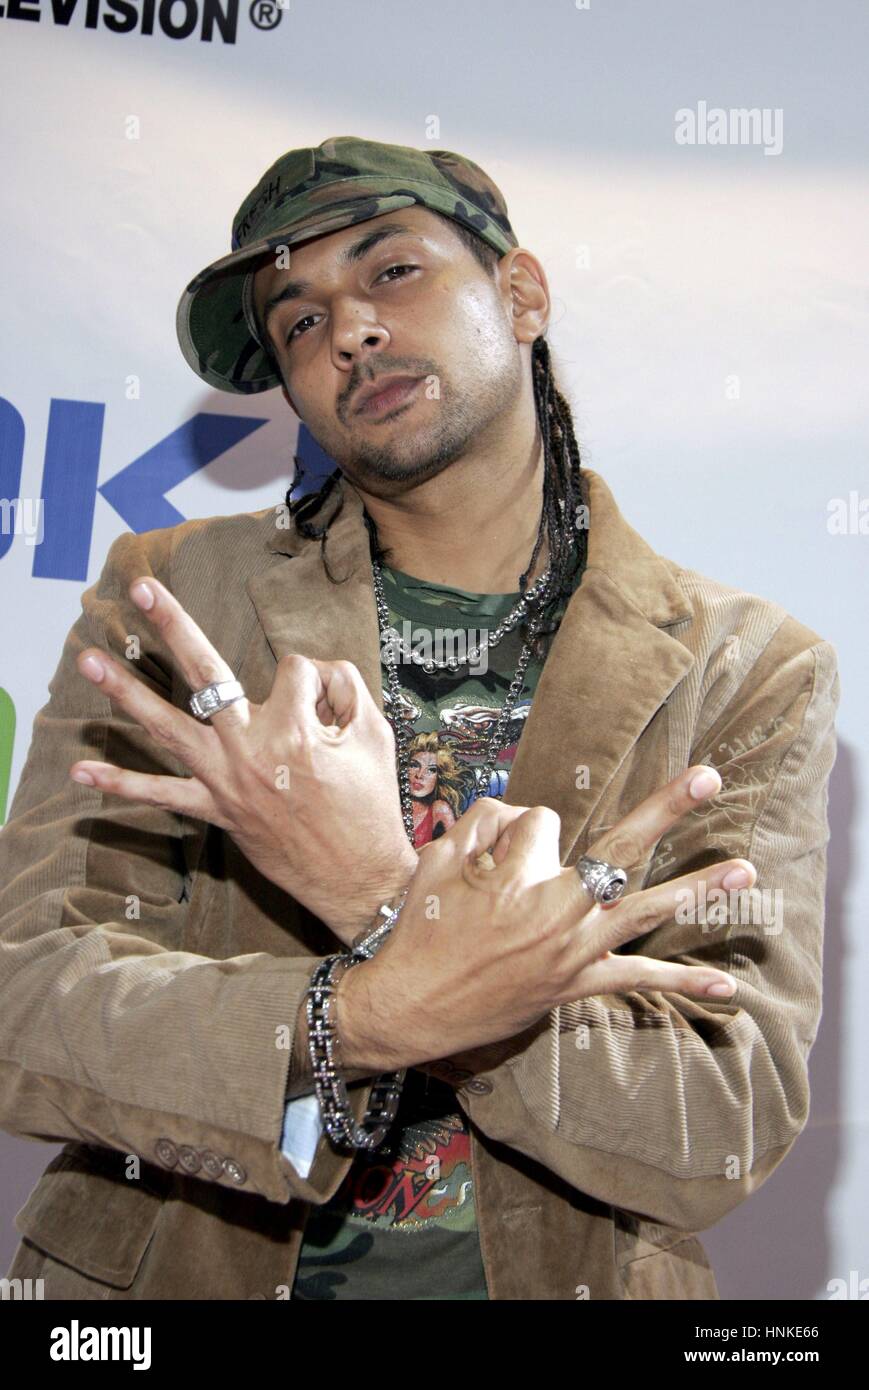 Rapper Sean Paul kommt, MTV und Nokias Live Music Series "Nokia Unwired" am Times Square am 27. September 2005 in New York City 27. September 2005 Stockfoto